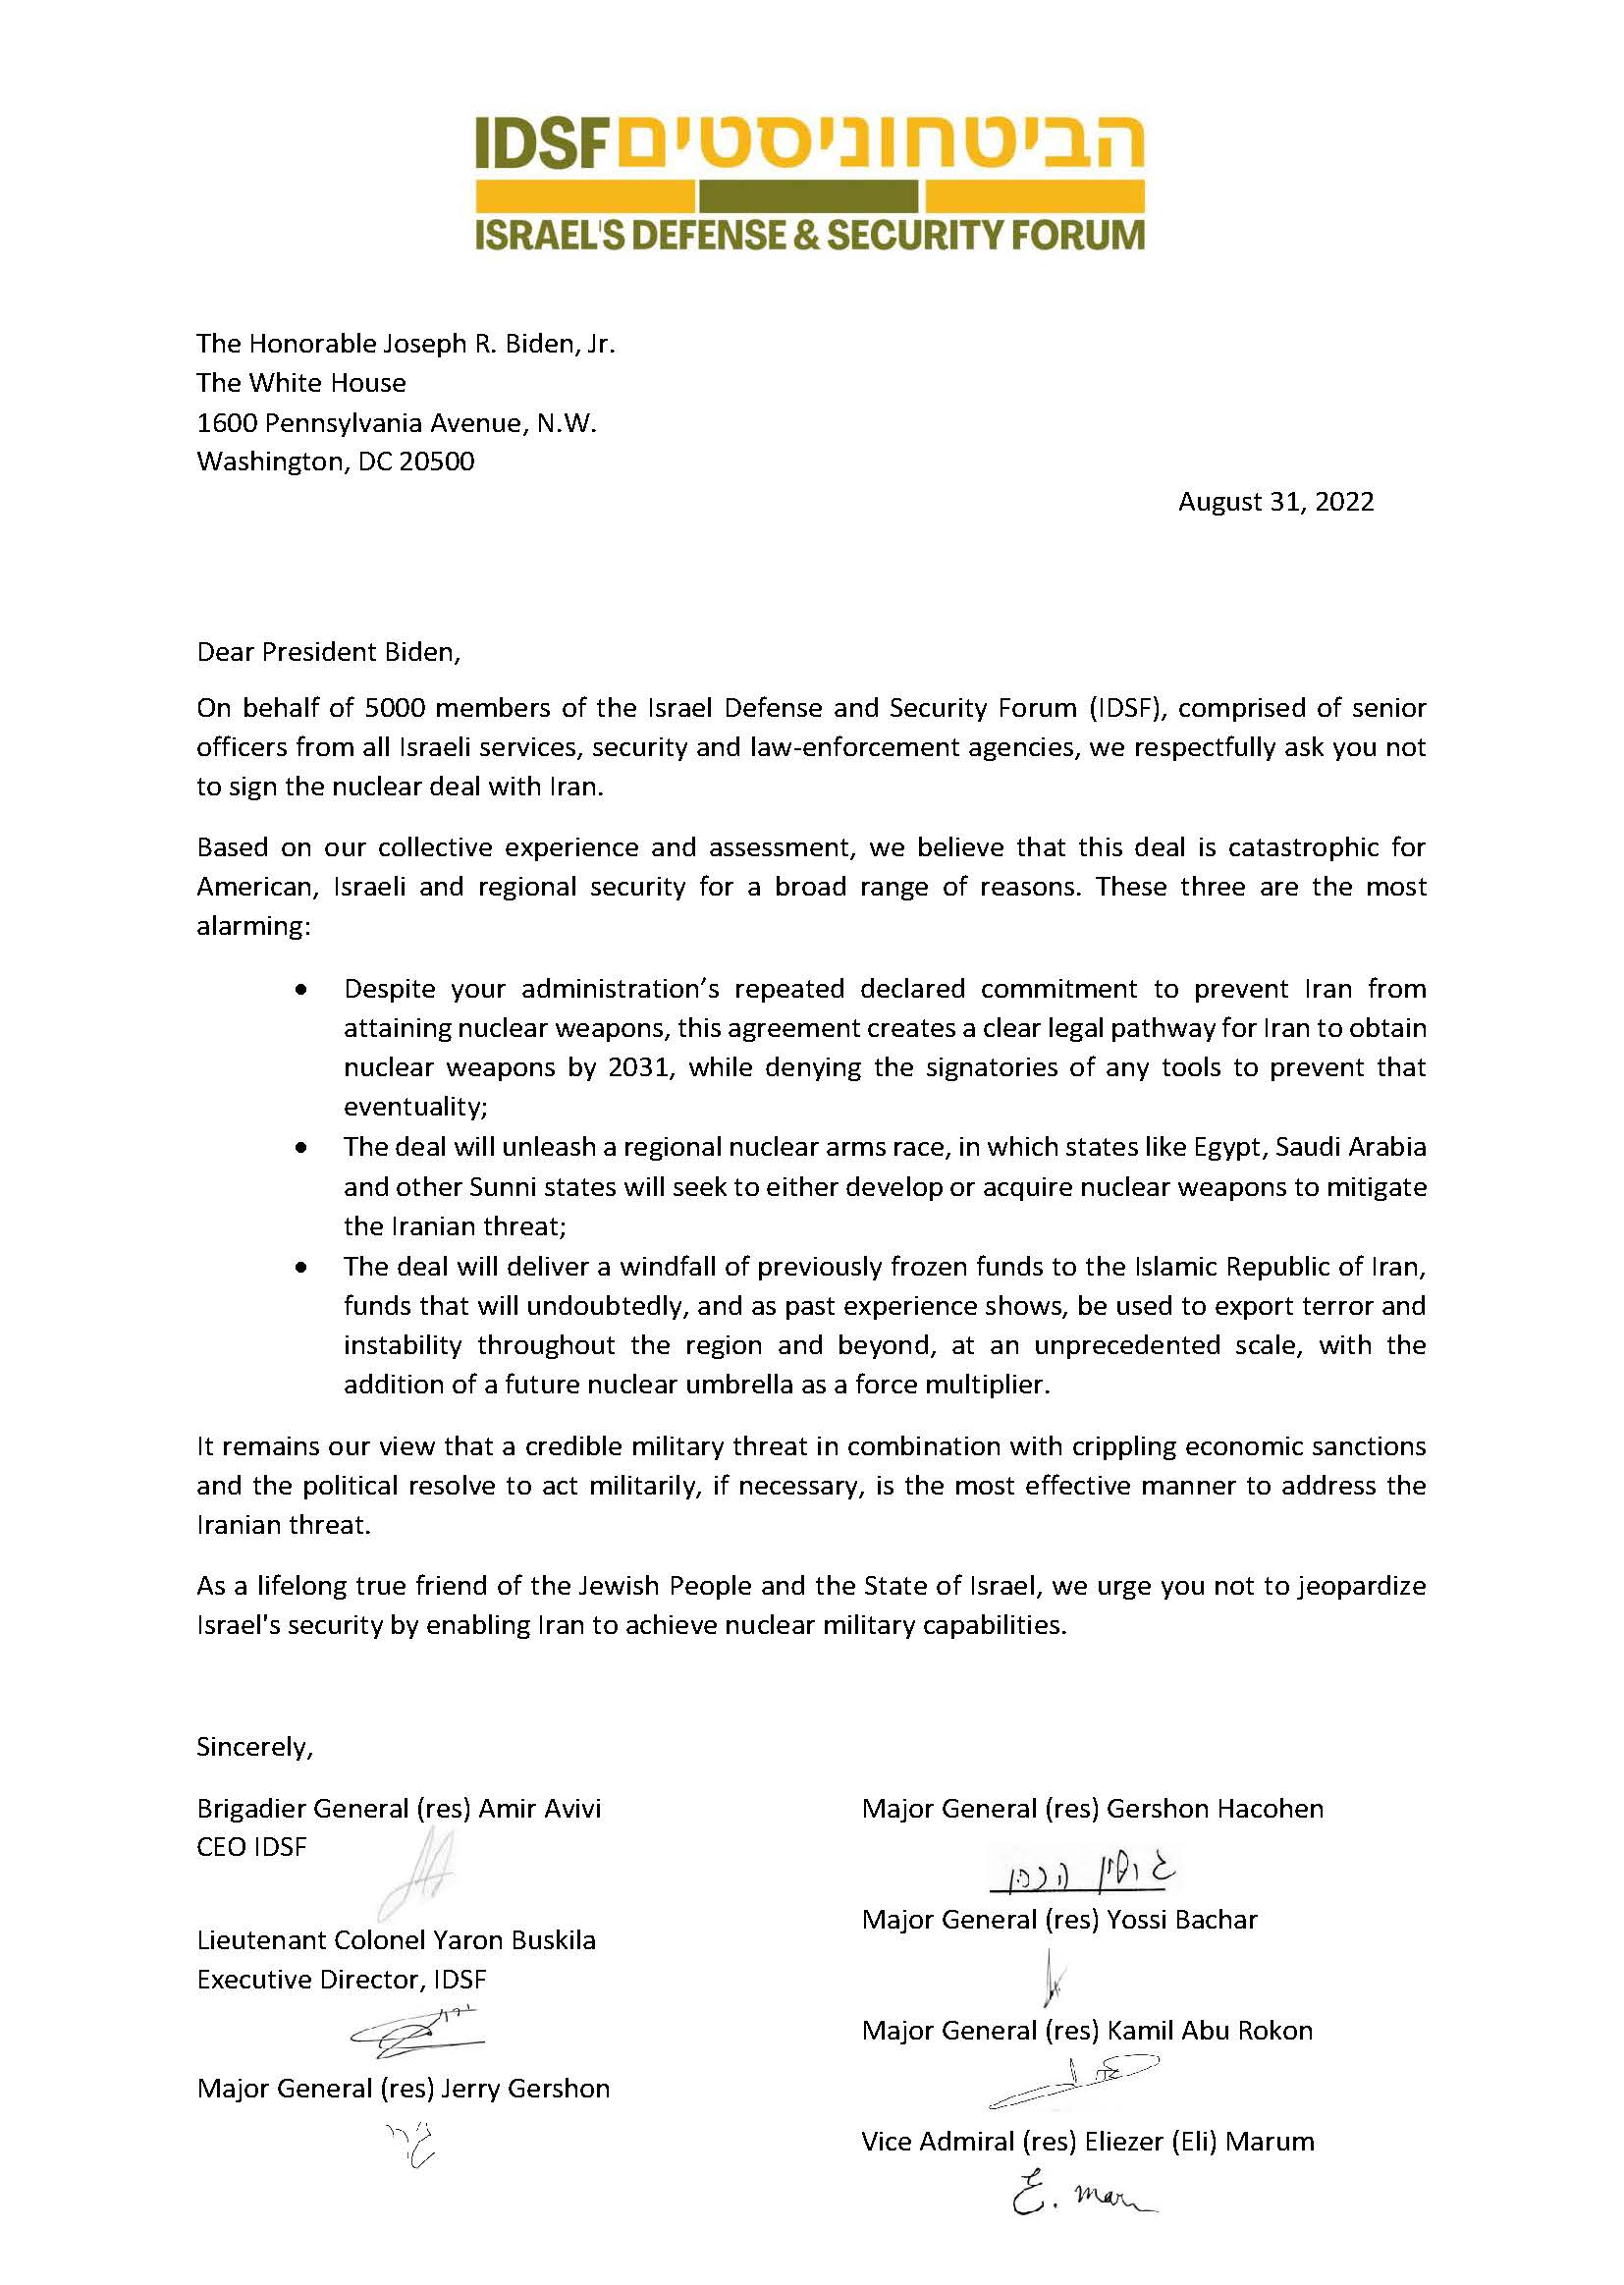 IDSF President Biden Signed Letter (eng)_Page_1